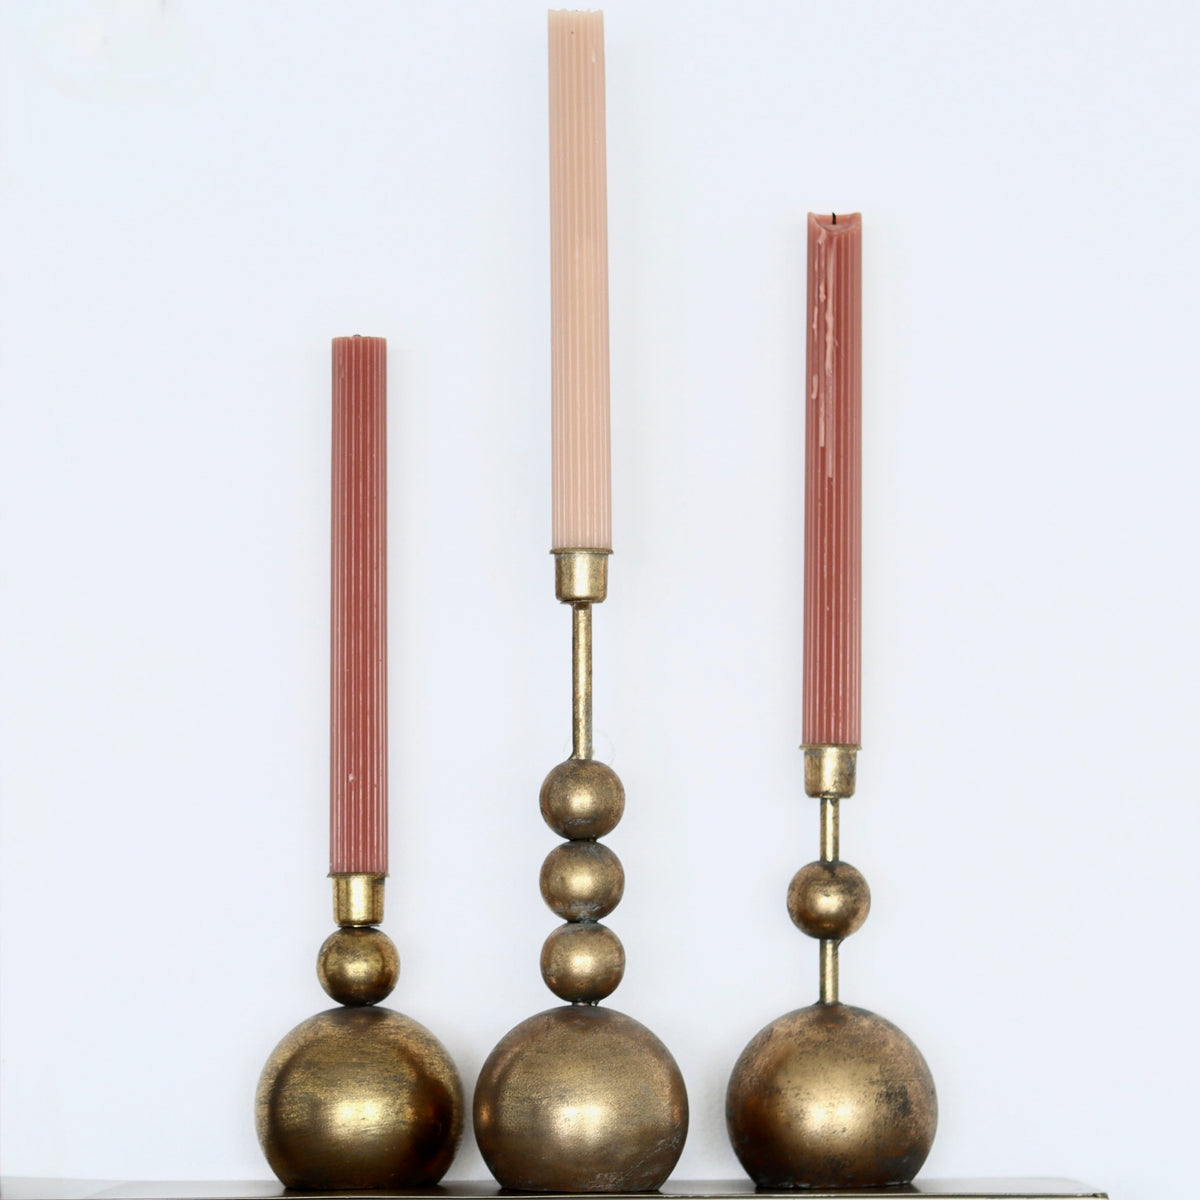 Stacked Metal Orb Antiqued Brass Finish Taper Candle Holders - Set of 3